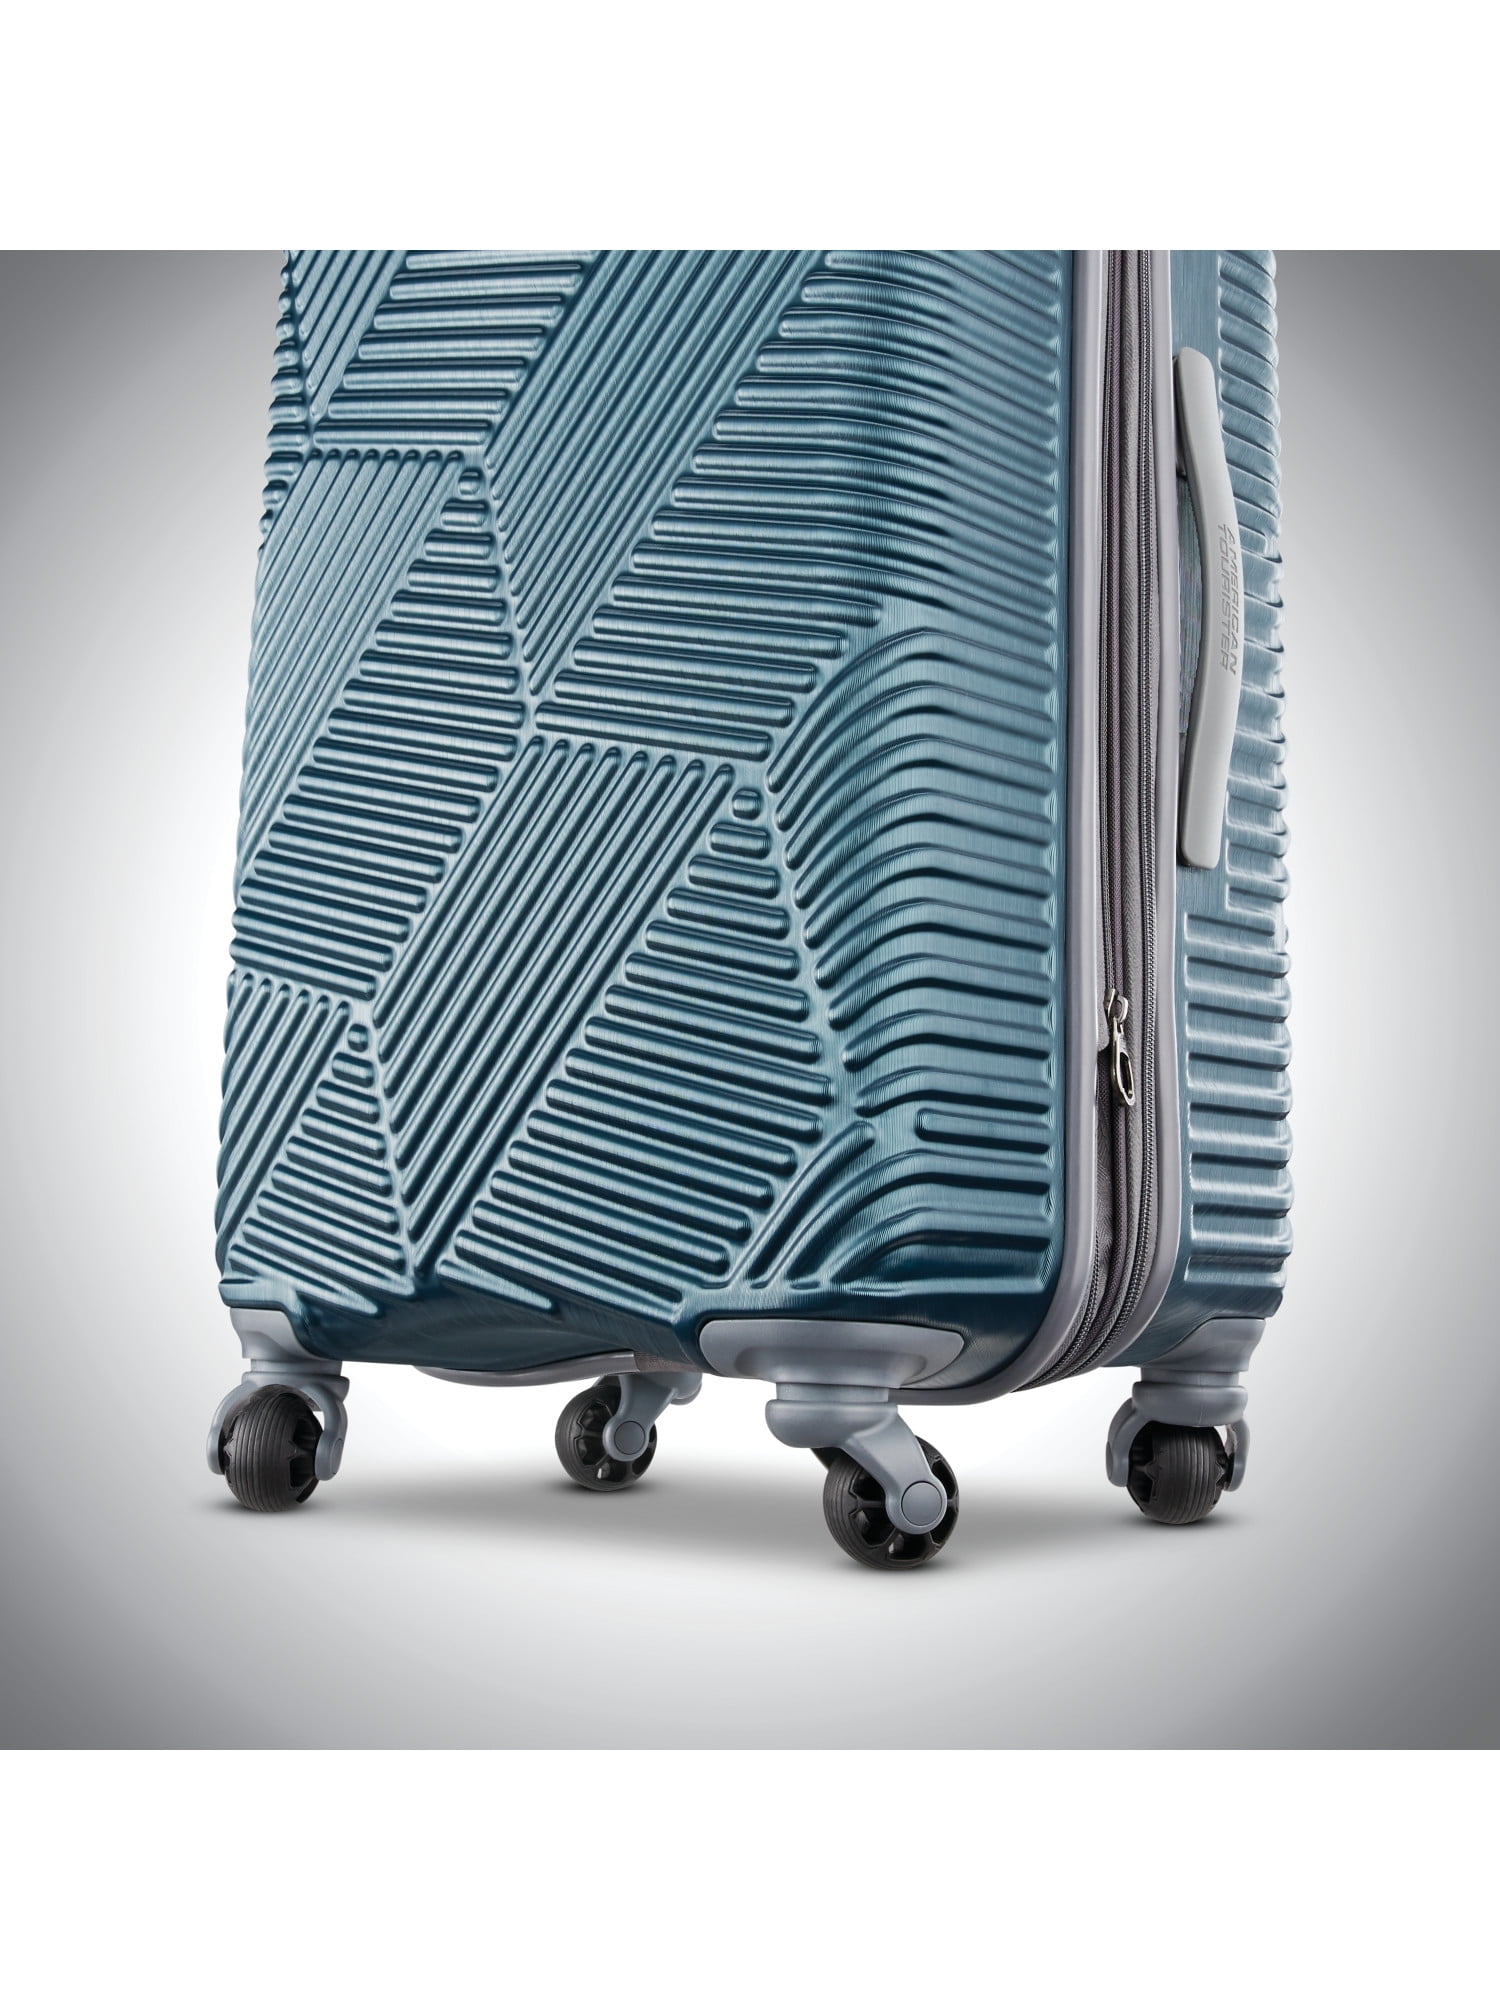 American Tourister Airweave Hardside Spinner, 20-Inch Carry-On